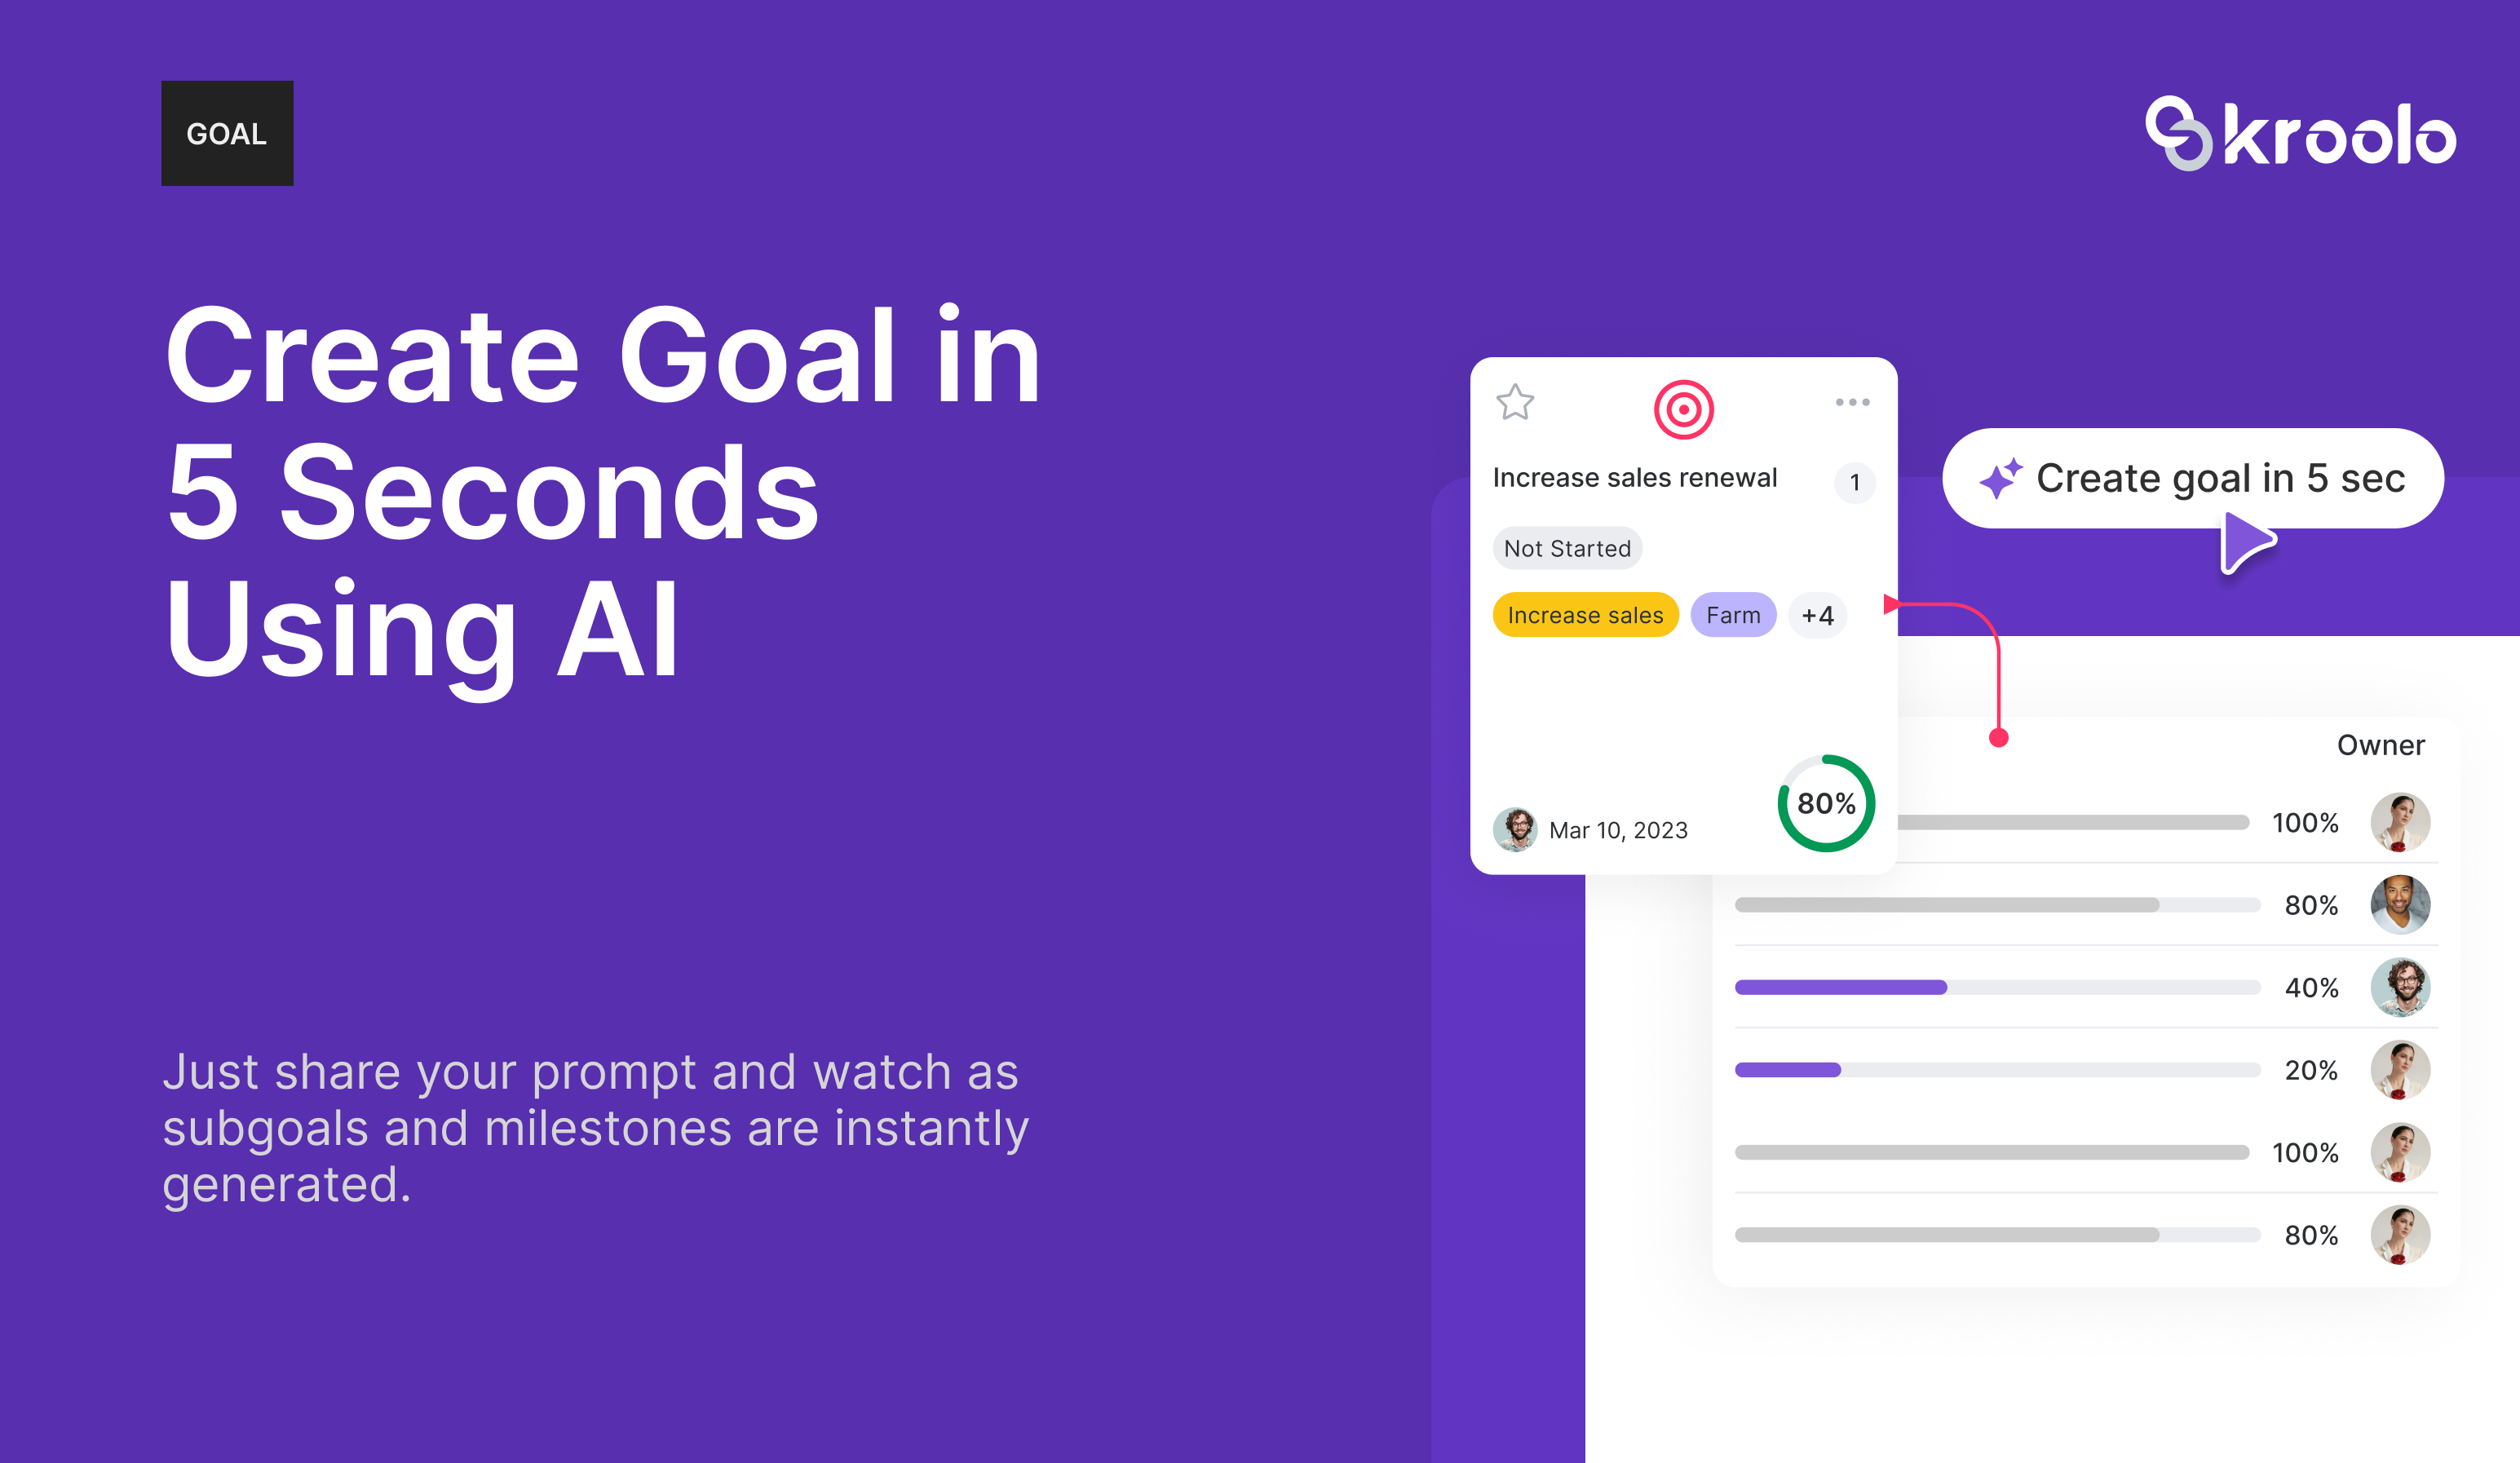 Goals - Create a goal / OKRs in less than 5 seconds with Kroolo. Just define your prompt and Goal OKRs gets instantly generated. You can create personal or team goals. 